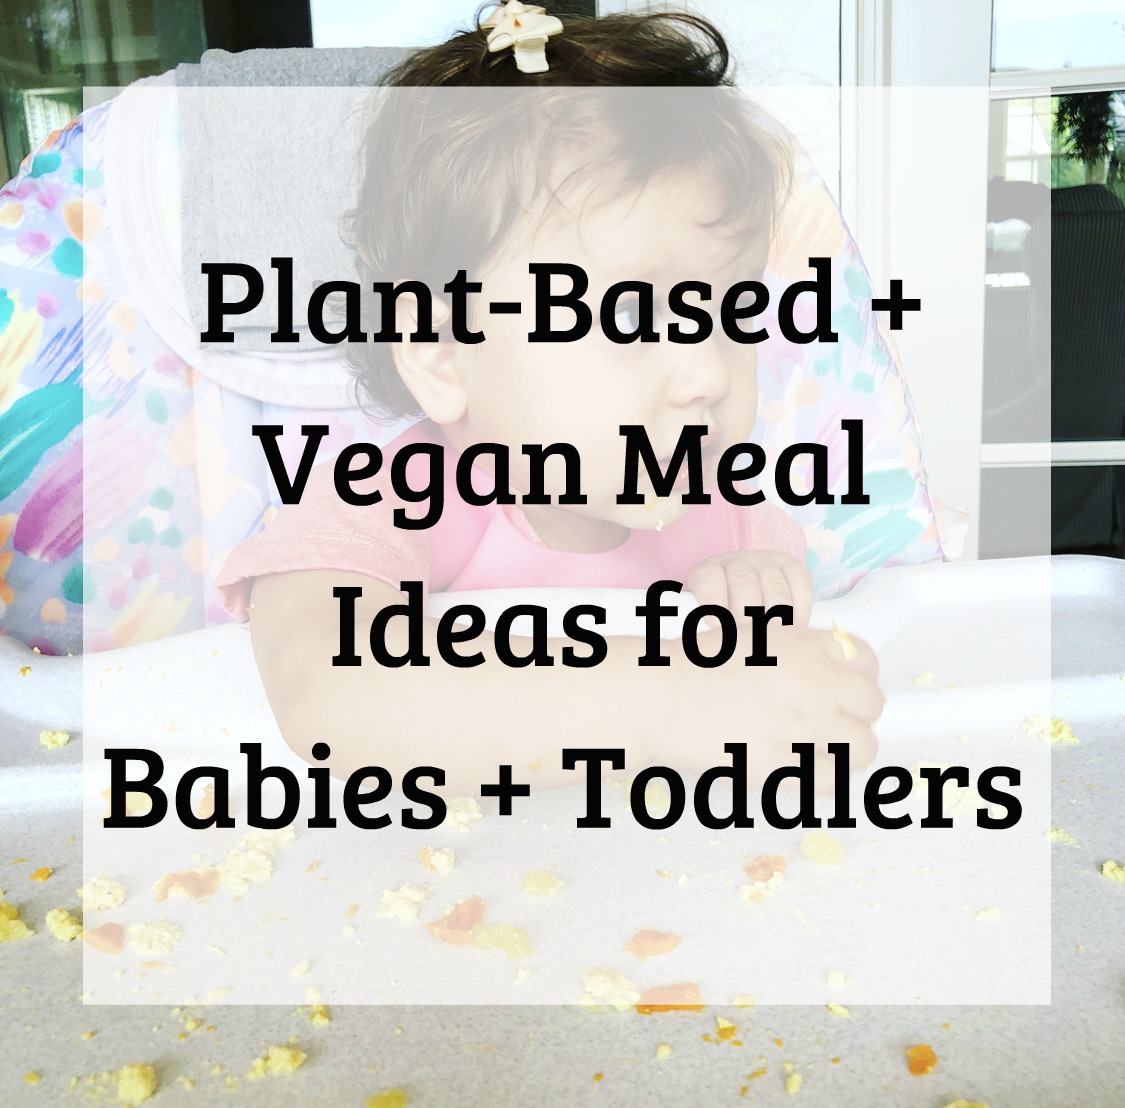 Plant-Based + Vegan Meal Ideas for Babies + Toddlers